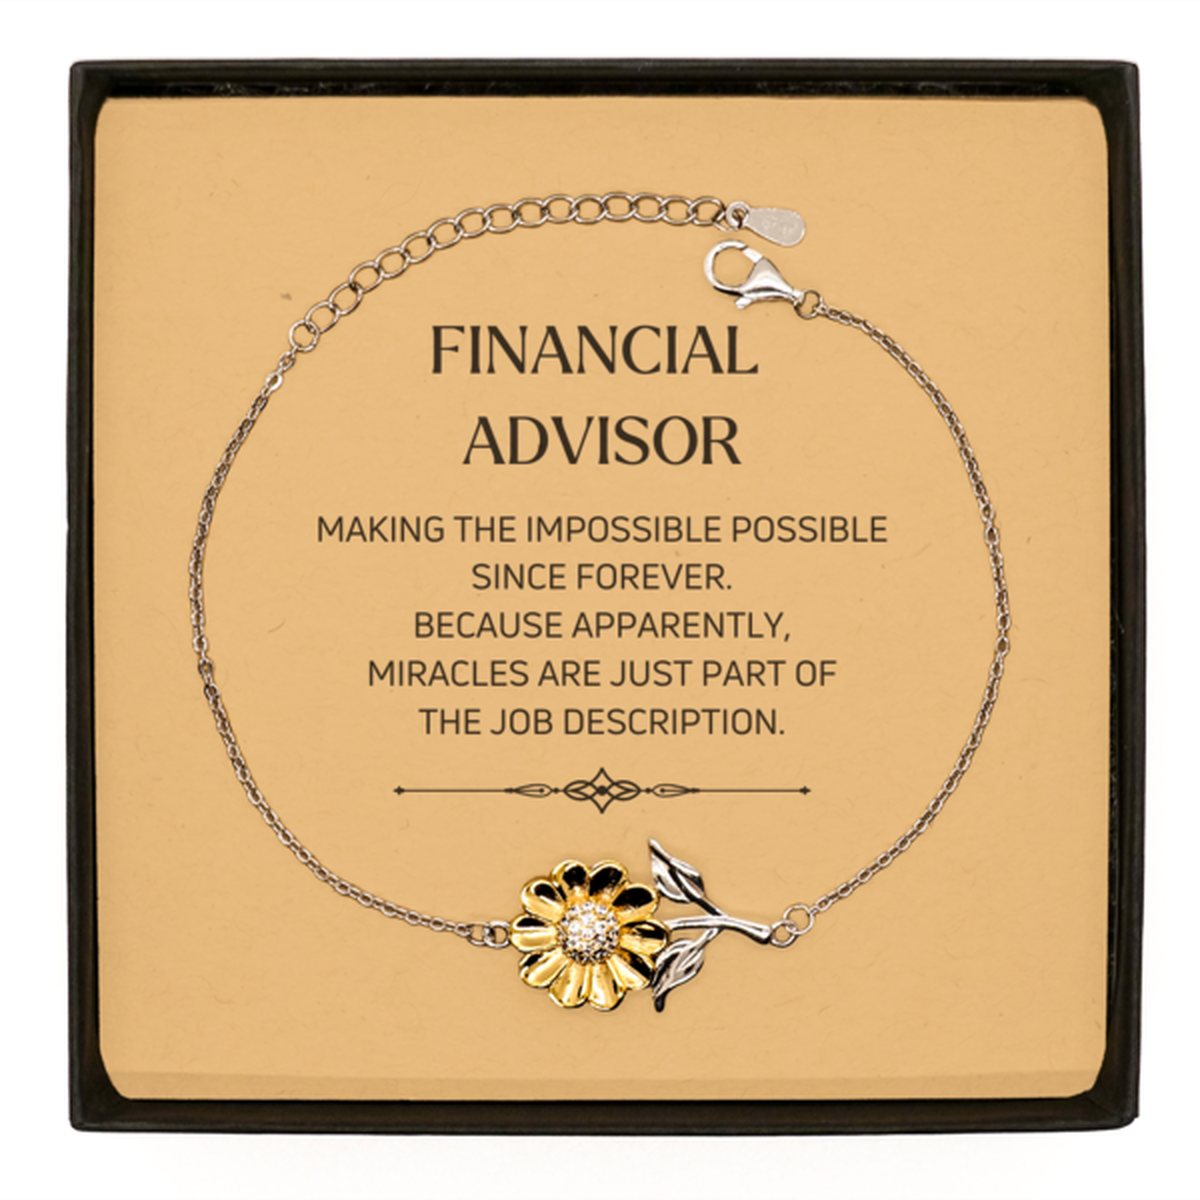 Funny Financial Advisor Gifts, Miracles are just part of the job description, Inspirational Birthday Sunflower Bracelet For Financial Advisor, Men, Women, Coworkers, Friends, Boss